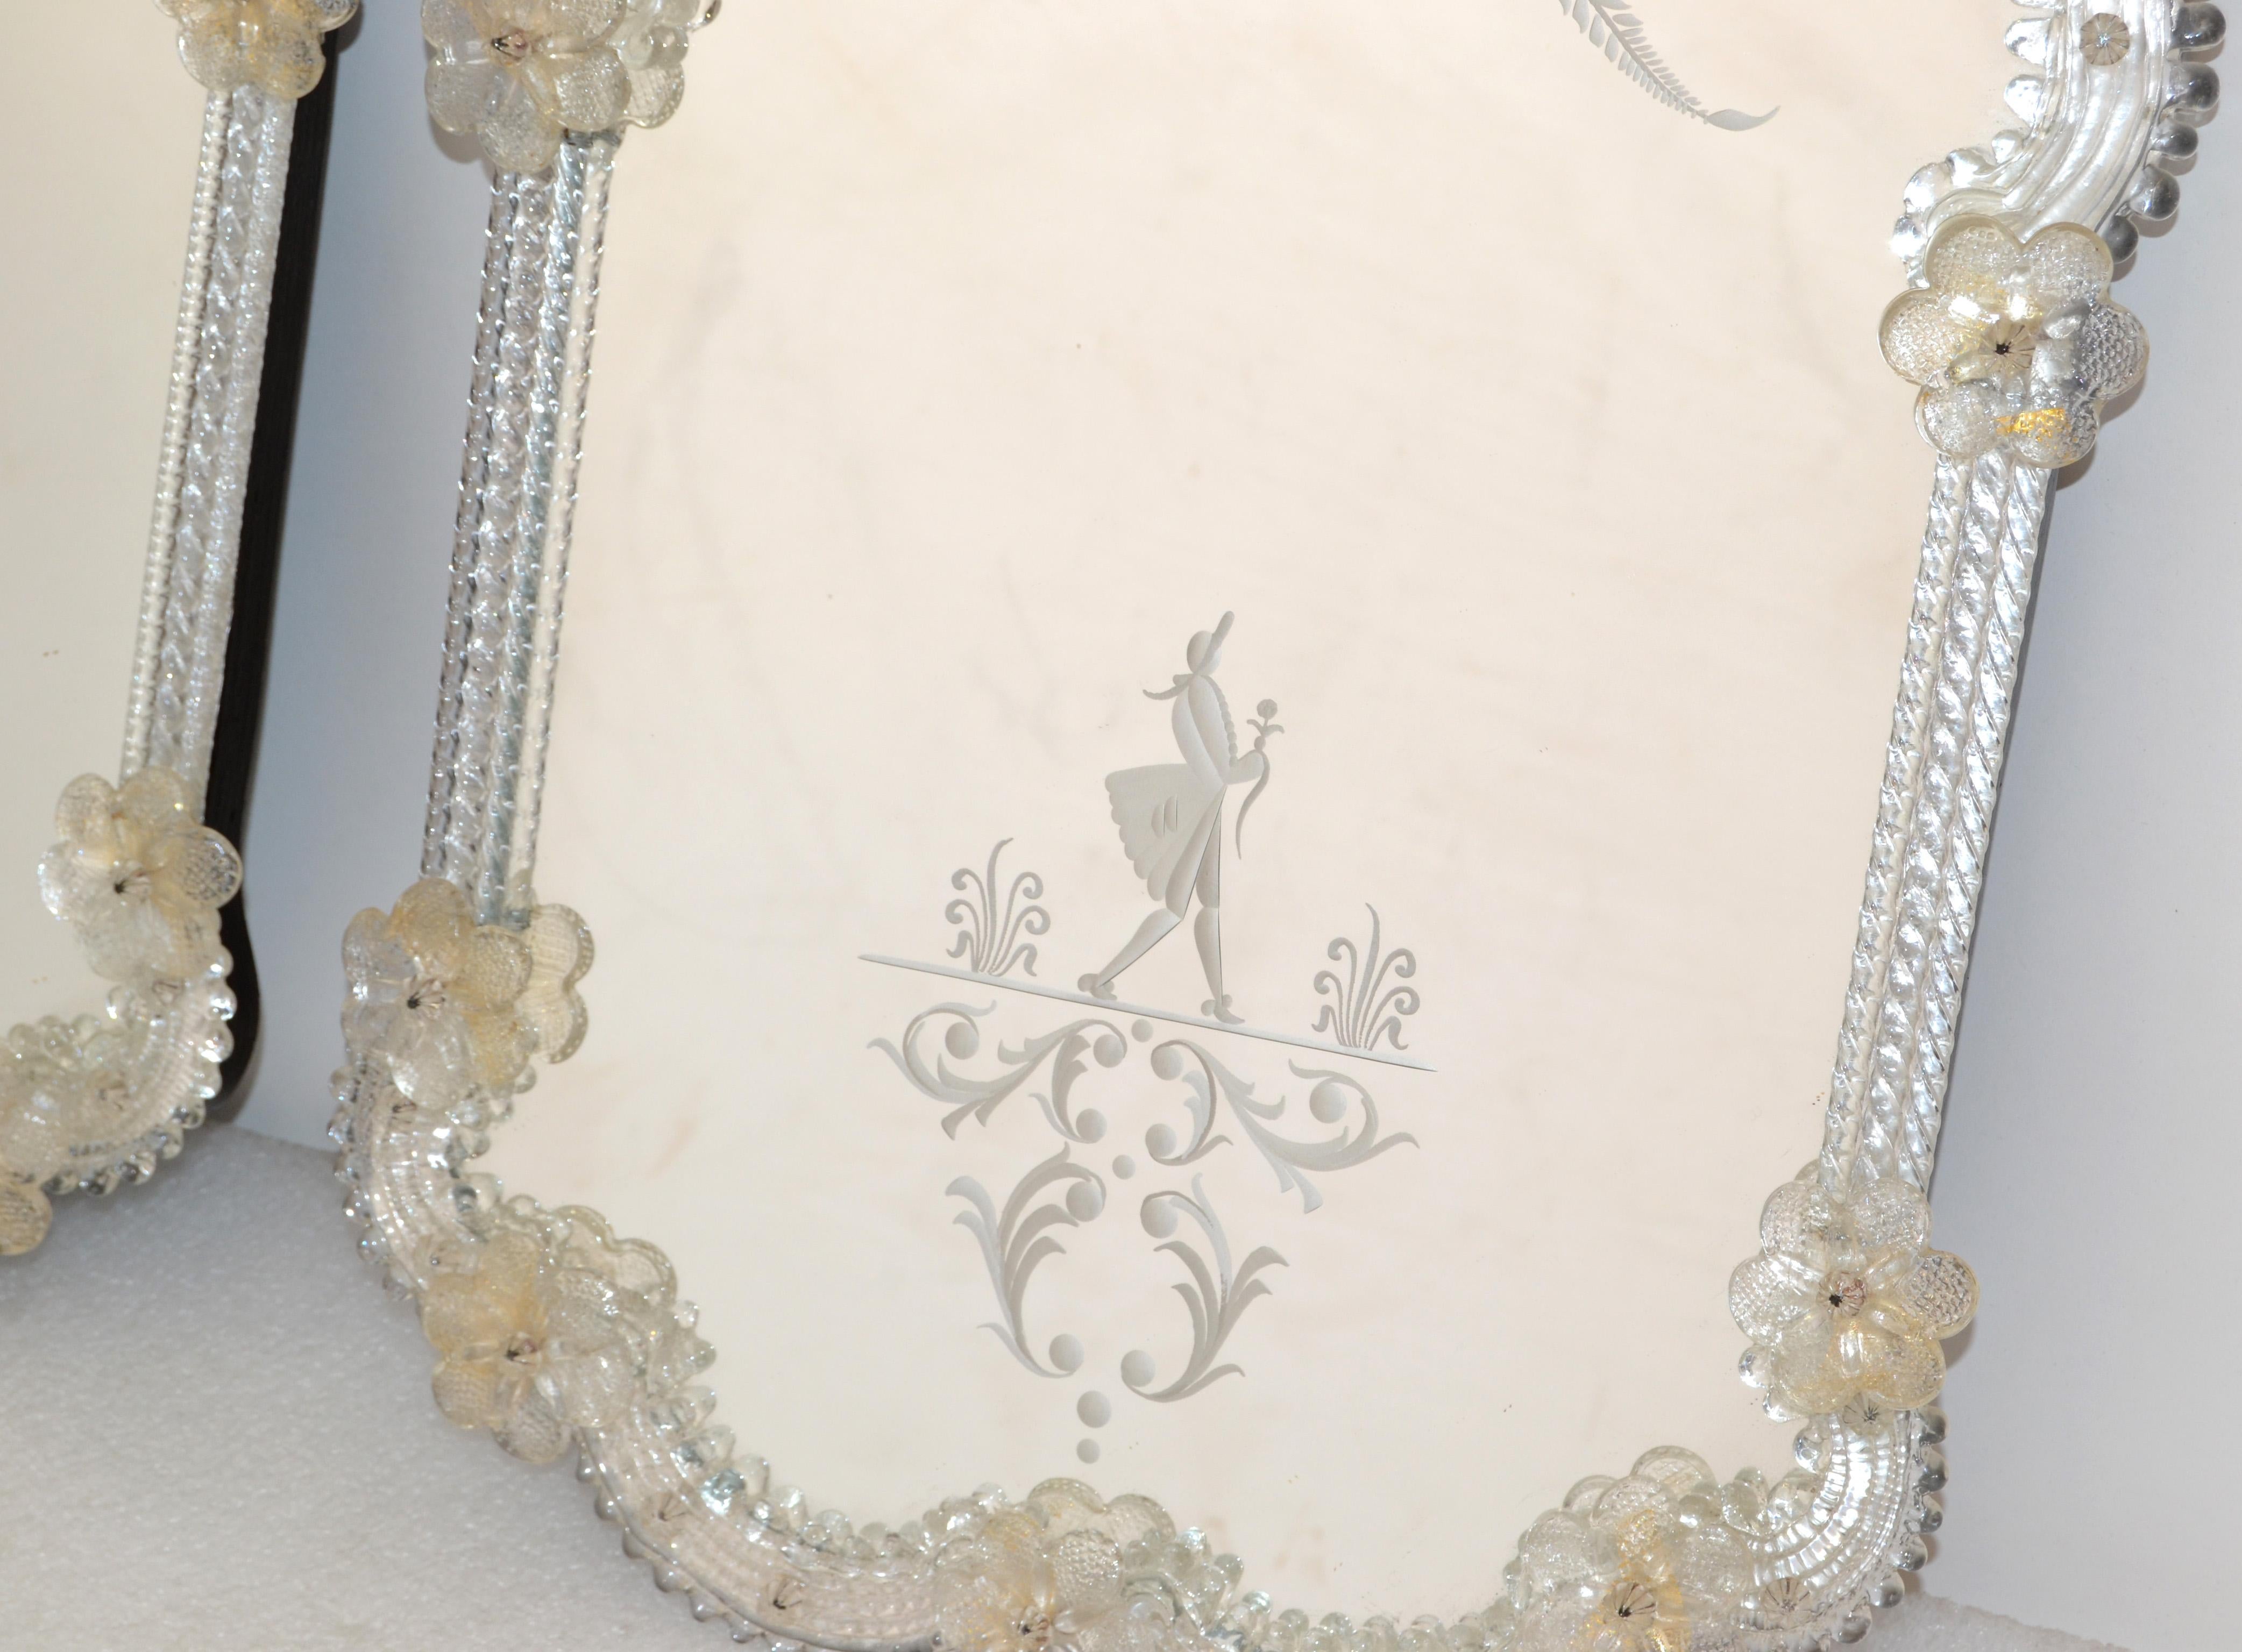 Rococo Revival Him and Her Etched Venetian Wall Mirror Bohemian Golden Flowers For Sale 5